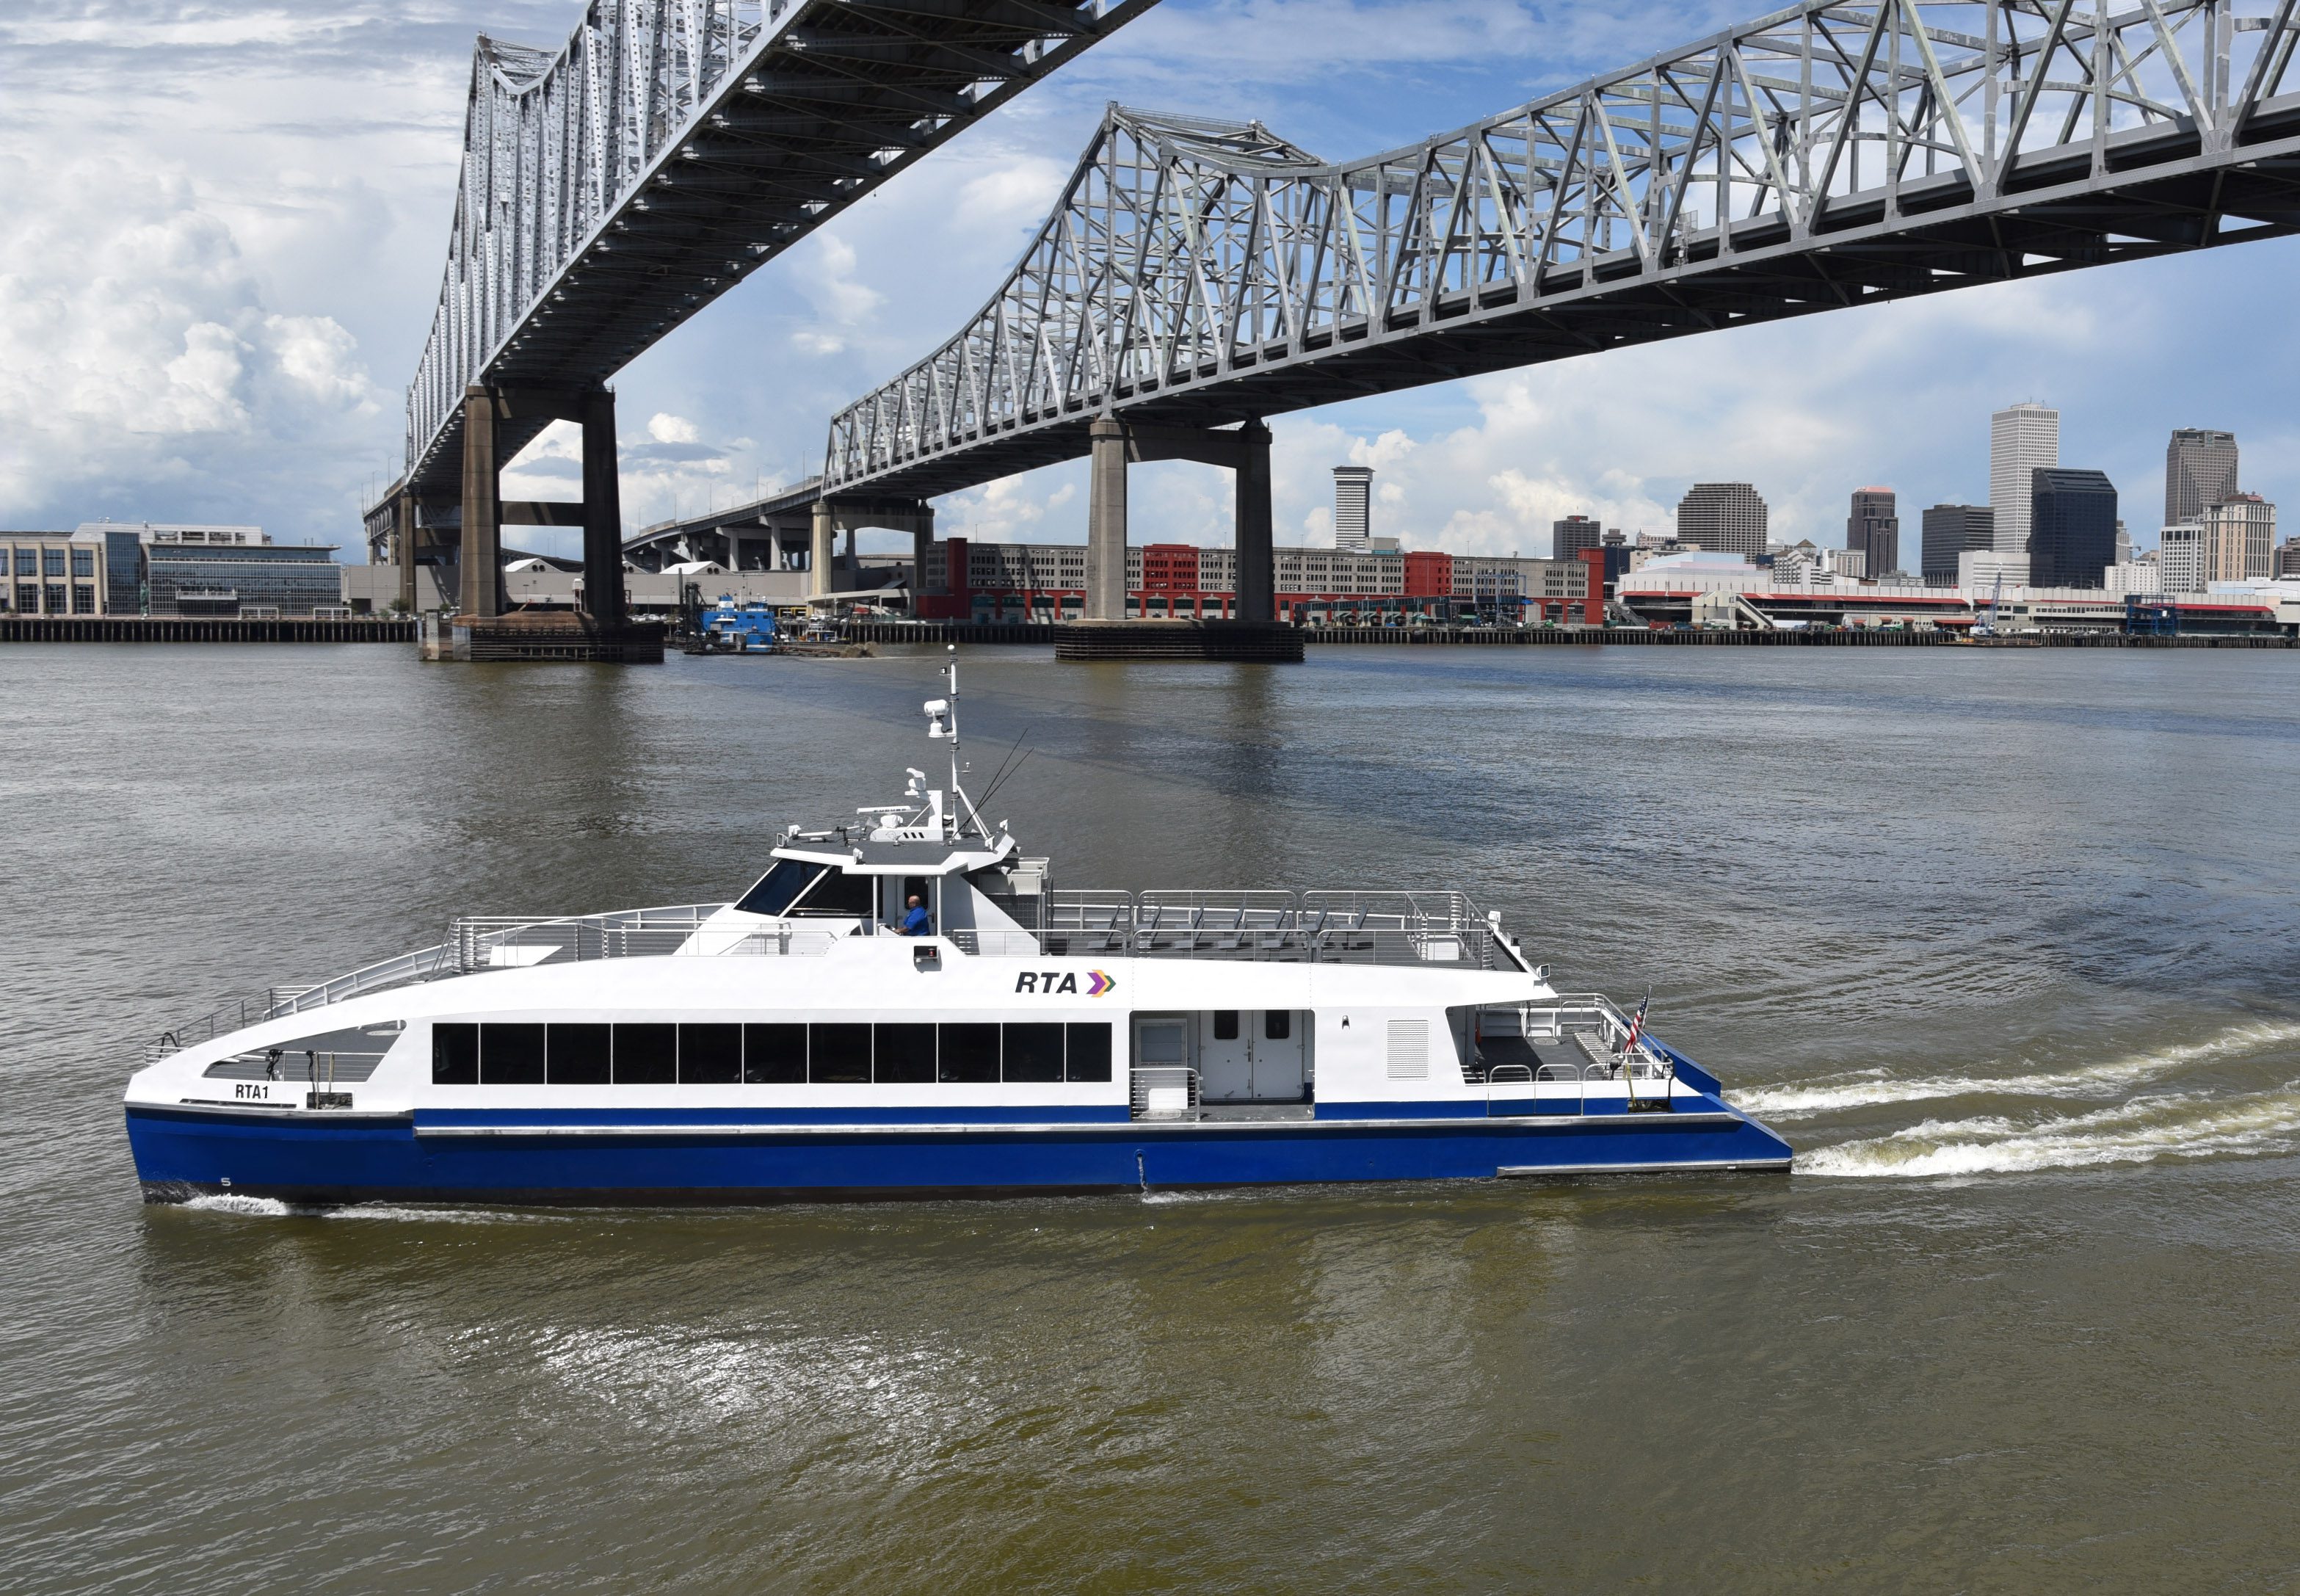 Metal Shark Completes New Passenger Ferries for New Orleans Regional Transit Authority